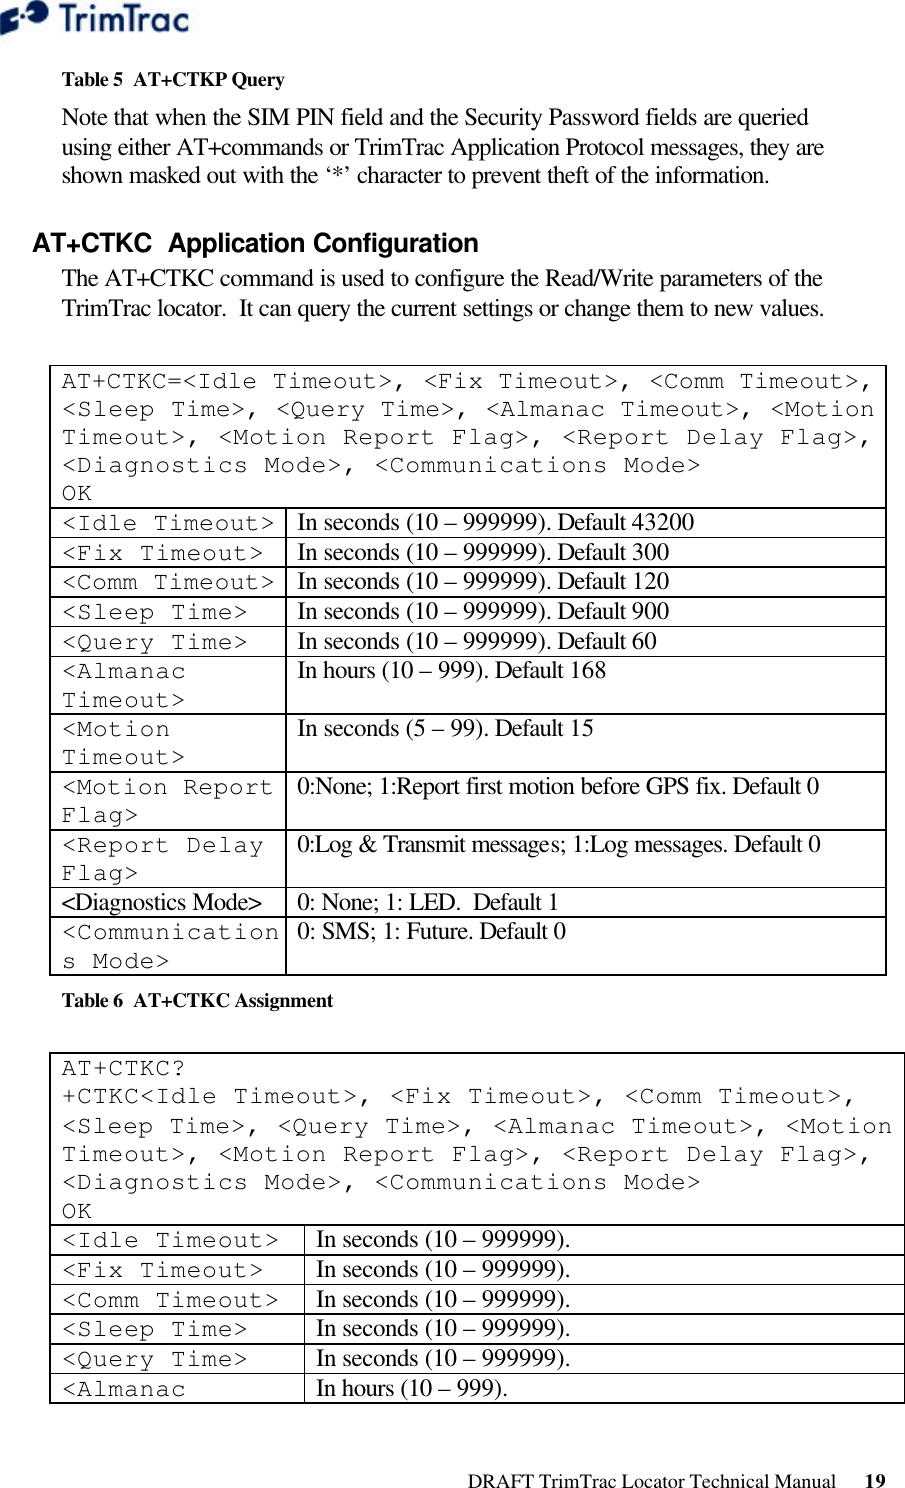  DRAFT TrimTrac Locator Technical Manual      19 Table 5  AT+CTKP Query Note that when the SIM PIN field and the Security Password fields are queried using either AT+commands or TrimTrac Application Protocol messages, they are shown masked out with the ‘*’ character to prevent theft of the information. AT+CTKC  Application Configuration The AT+CTKC command is used to configure the Read/Write parameters of the TrimTrac locator.  It can query the current settings or change them to new values.  AT+CTKC=&lt;Idle Timeout&gt;, &lt;Fix Timeout&gt;, &lt;Comm Timeout&gt;, &lt;Sleep Time&gt;, &lt;Query Time&gt;, &lt;Almanac Timeout&gt;, &lt;Motion Timeout&gt;, &lt;Motion Report Flag&gt;, &lt;Report Delay Flag&gt;, &lt;Diagnostics Mode&gt;, &lt;Communications Mode&gt; OK &lt;Idle Timeout&gt; In seconds (10 – 999999). Default 43200 &lt;Fix Timeout&gt; In seconds (10 – 999999). Default 300 &lt;Comm Timeout&gt; In seconds (10 – 999999). Default 120 &lt;Sleep Time&gt; In seconds (10 – 999999). Default 900 &lt;Query Time&gt; In seconds (10 – 999999). Default 60 &lt;Almanac Timeout&gt; In hours (10 – 999). Default 168 &lt;Motion Timeout&gt; In seconds (5 – 99). Default 15 &lt;Motion Report Flag&gt; 0:None; 1:Report first motion before GPS fix. Default 0 &lt;Report Delay Flag&gt; 0:Log &amp; Transmit messages; 1:Log messages. Default 0 &lt;Diagnostics Mode&gt; 0: None; 1: LED.  Default 1 &lt;Communications Mode&gt; 0: SMS; 1: Future. Default 0 Table 6  AT+CTKC Assignment  AT+CTKC? +CTKC&lt;Idle Timeout&gt;, &lt;Fix Timeout&gt;, &lt;Comm Timeout&gt;, &lt;Sleep Time&gt;, &lt;Query Time&gt;, &lt;Almanac Timeout&gt;, &lt;Motion Timeout&gt;, &lt;Motion Report Flag&gt;, &lt;Report Delay Flag&gt;, &lt;Diagnostics Mode&gt;, &lt;Communications Mode&gt; OK &lt;Idle Timeout&gt; In seconds (10 – 999999). &lt;Fix Timeout&gt; In seconds (10 – 999999). &lt;Comm Timeout&gt; In seconds (10 – 999999). &lt;Sleep Time&gt; In seconds (10 – 999999). &lt;Query Time&gt; In seconds (10 – 999999). &lt;Almanac In hours (10 – 999). 